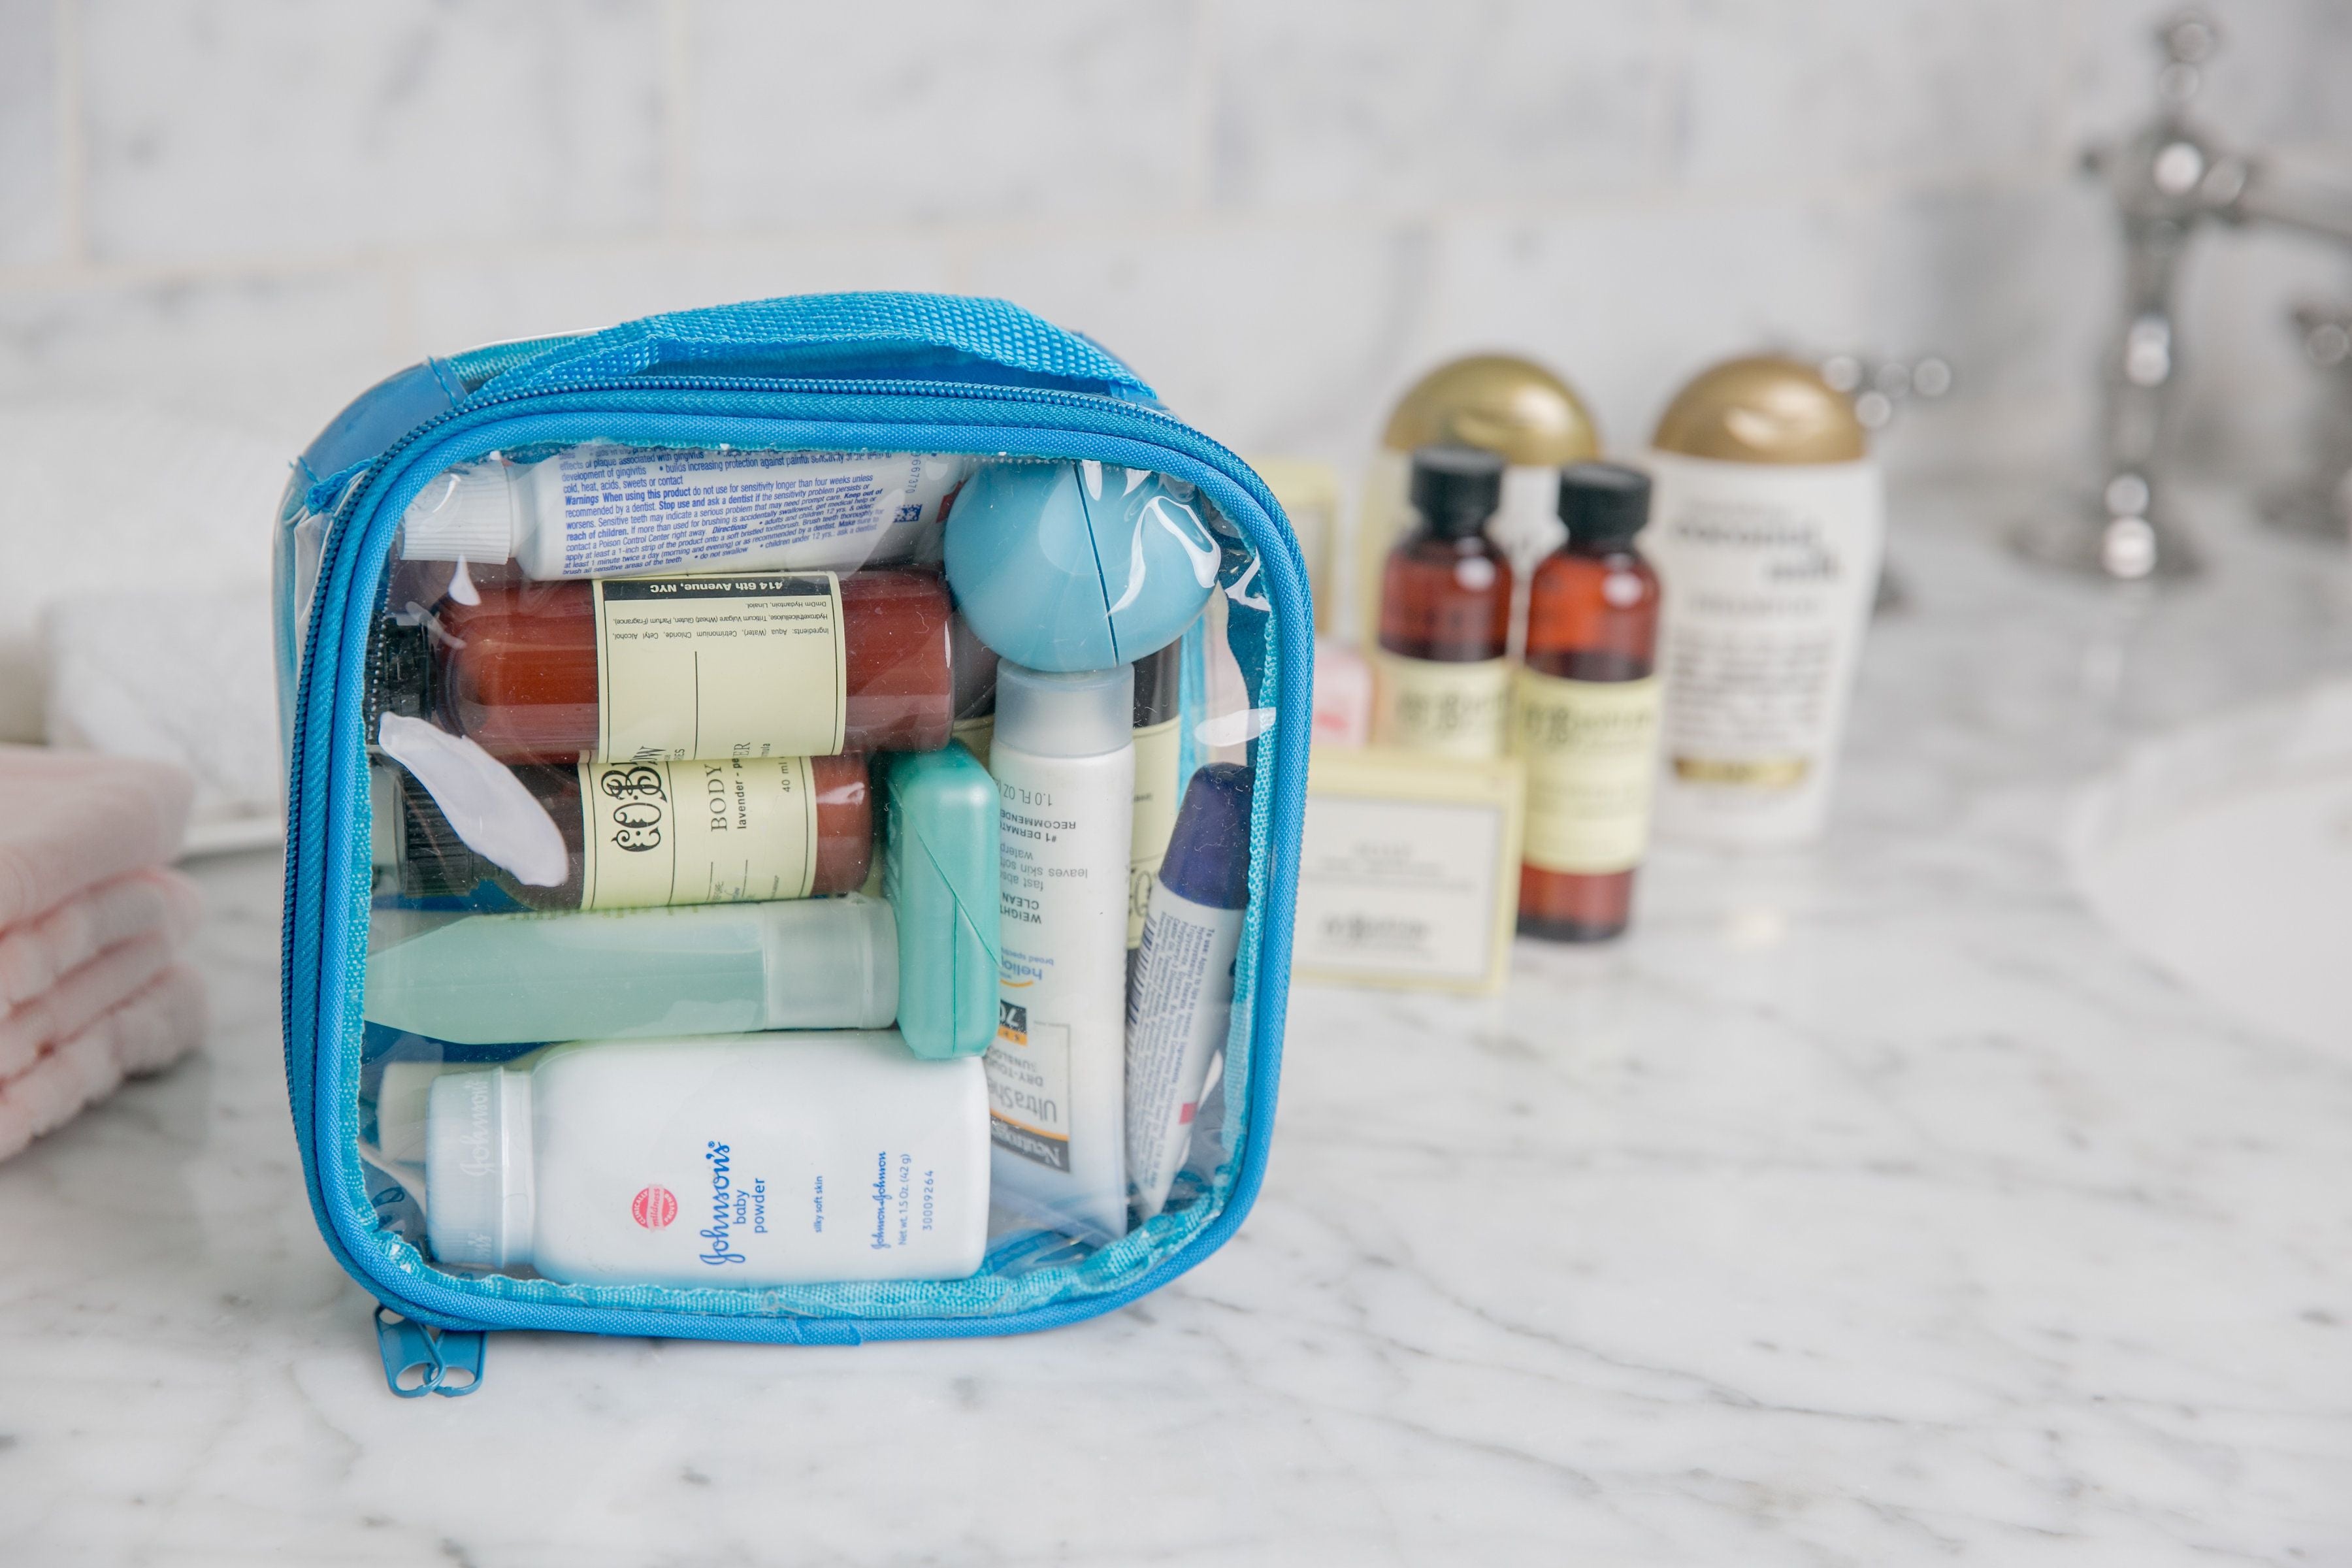 Toiletry in turquoise extra small cube for an overnight trip